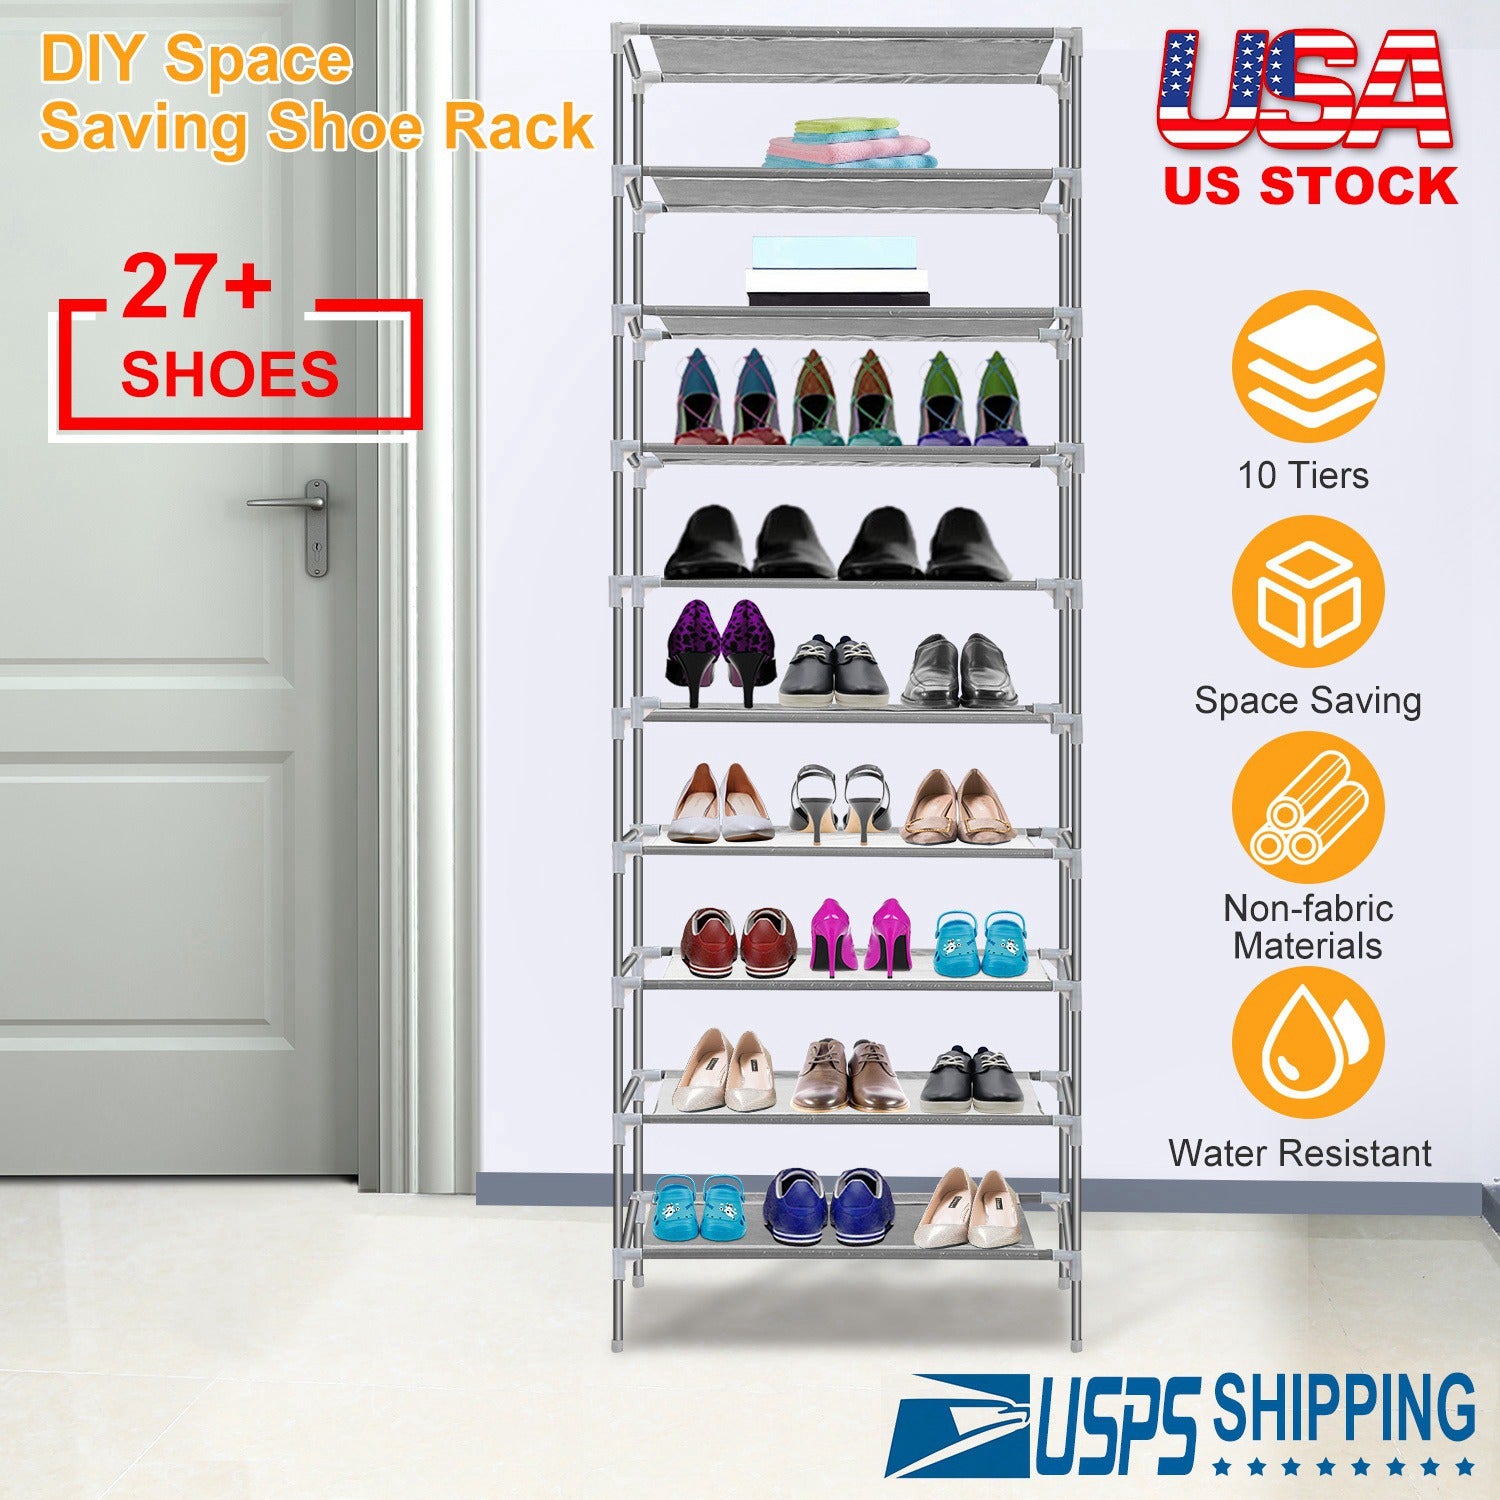 title:10 Tiers Shoes Rack Shelves 27 Pairs Shoes Storage Organizer Stand Non-Woven Fabric Detachable Shoes Tower Stackable Shoes Storage Rack for Entryway;color:Gray